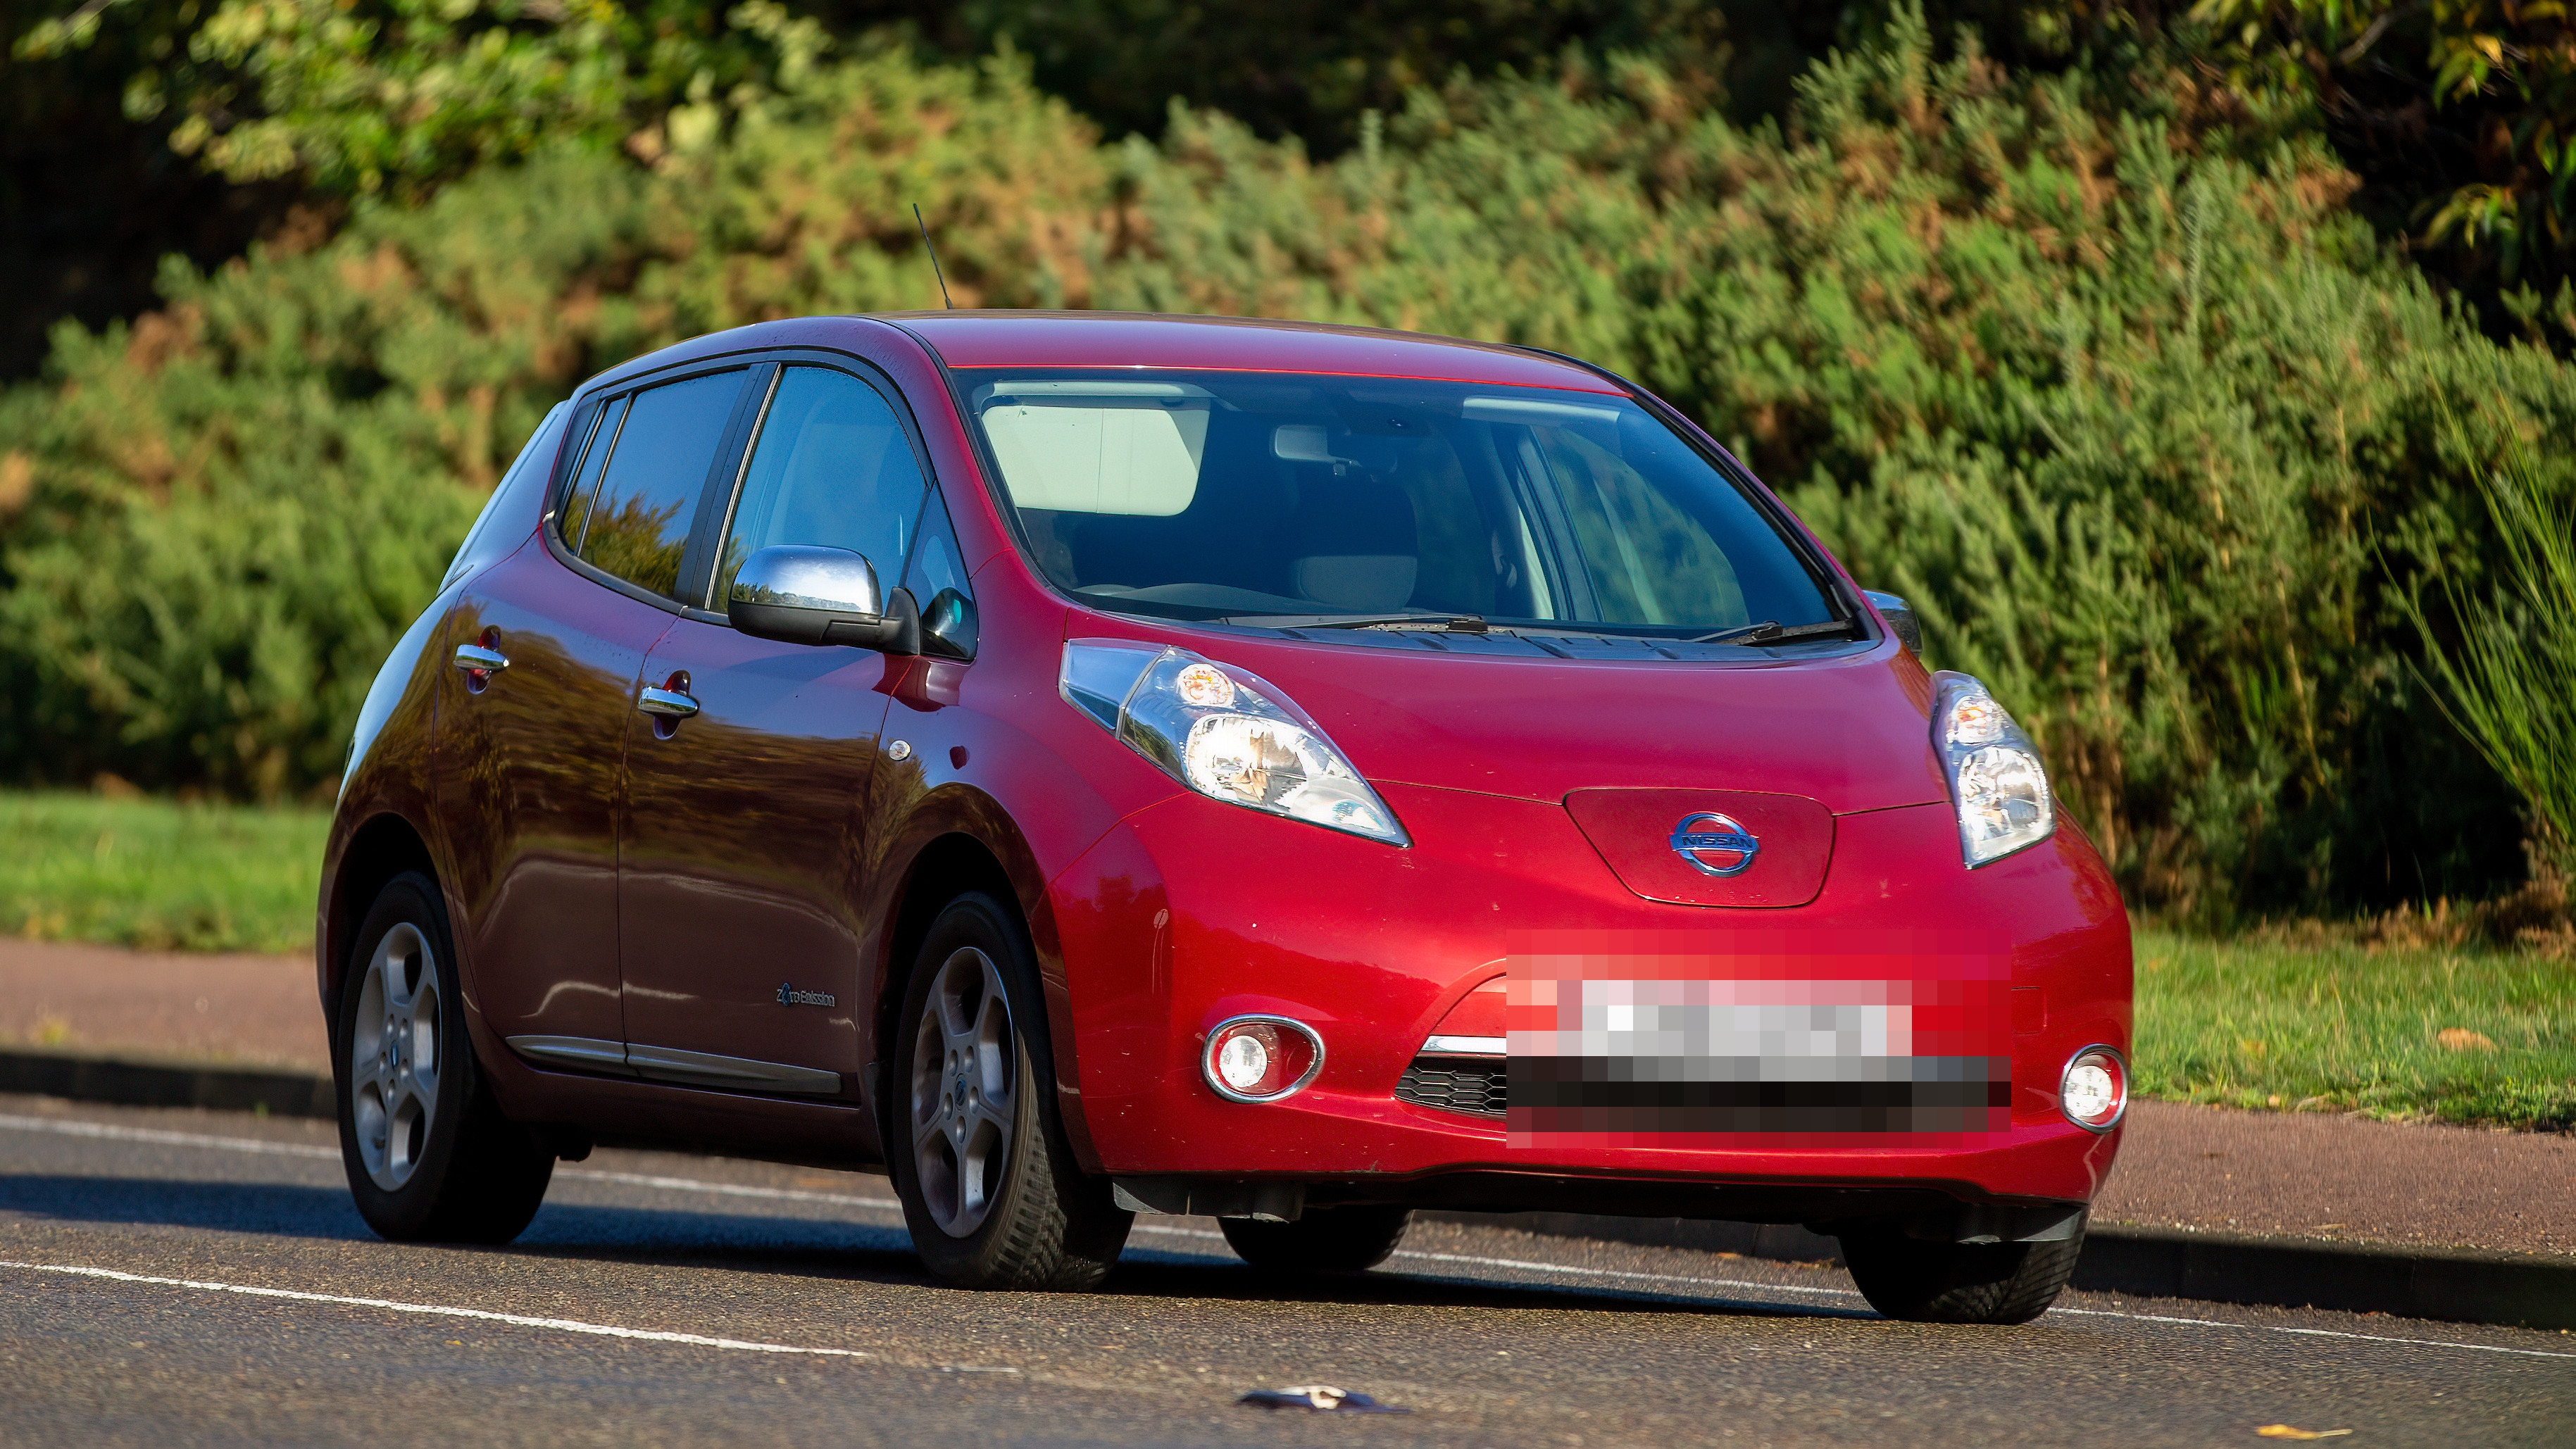 The electric Nissan Leaf has also seen a sizeable drop in value